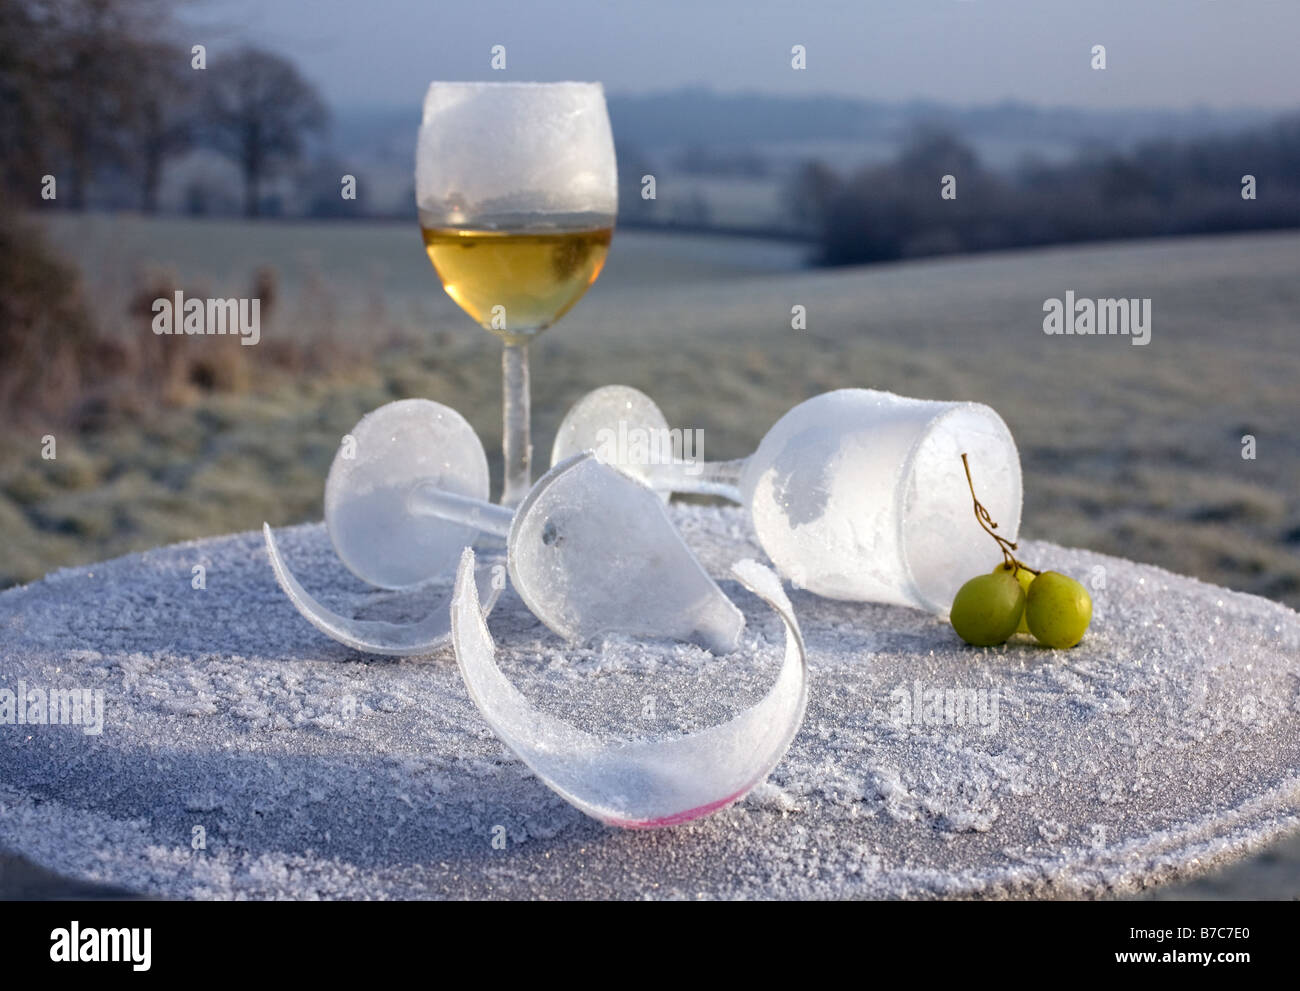 Morning-after-night-before frosted and broken wine glass party remains in frozen countryside UK Stock Photo